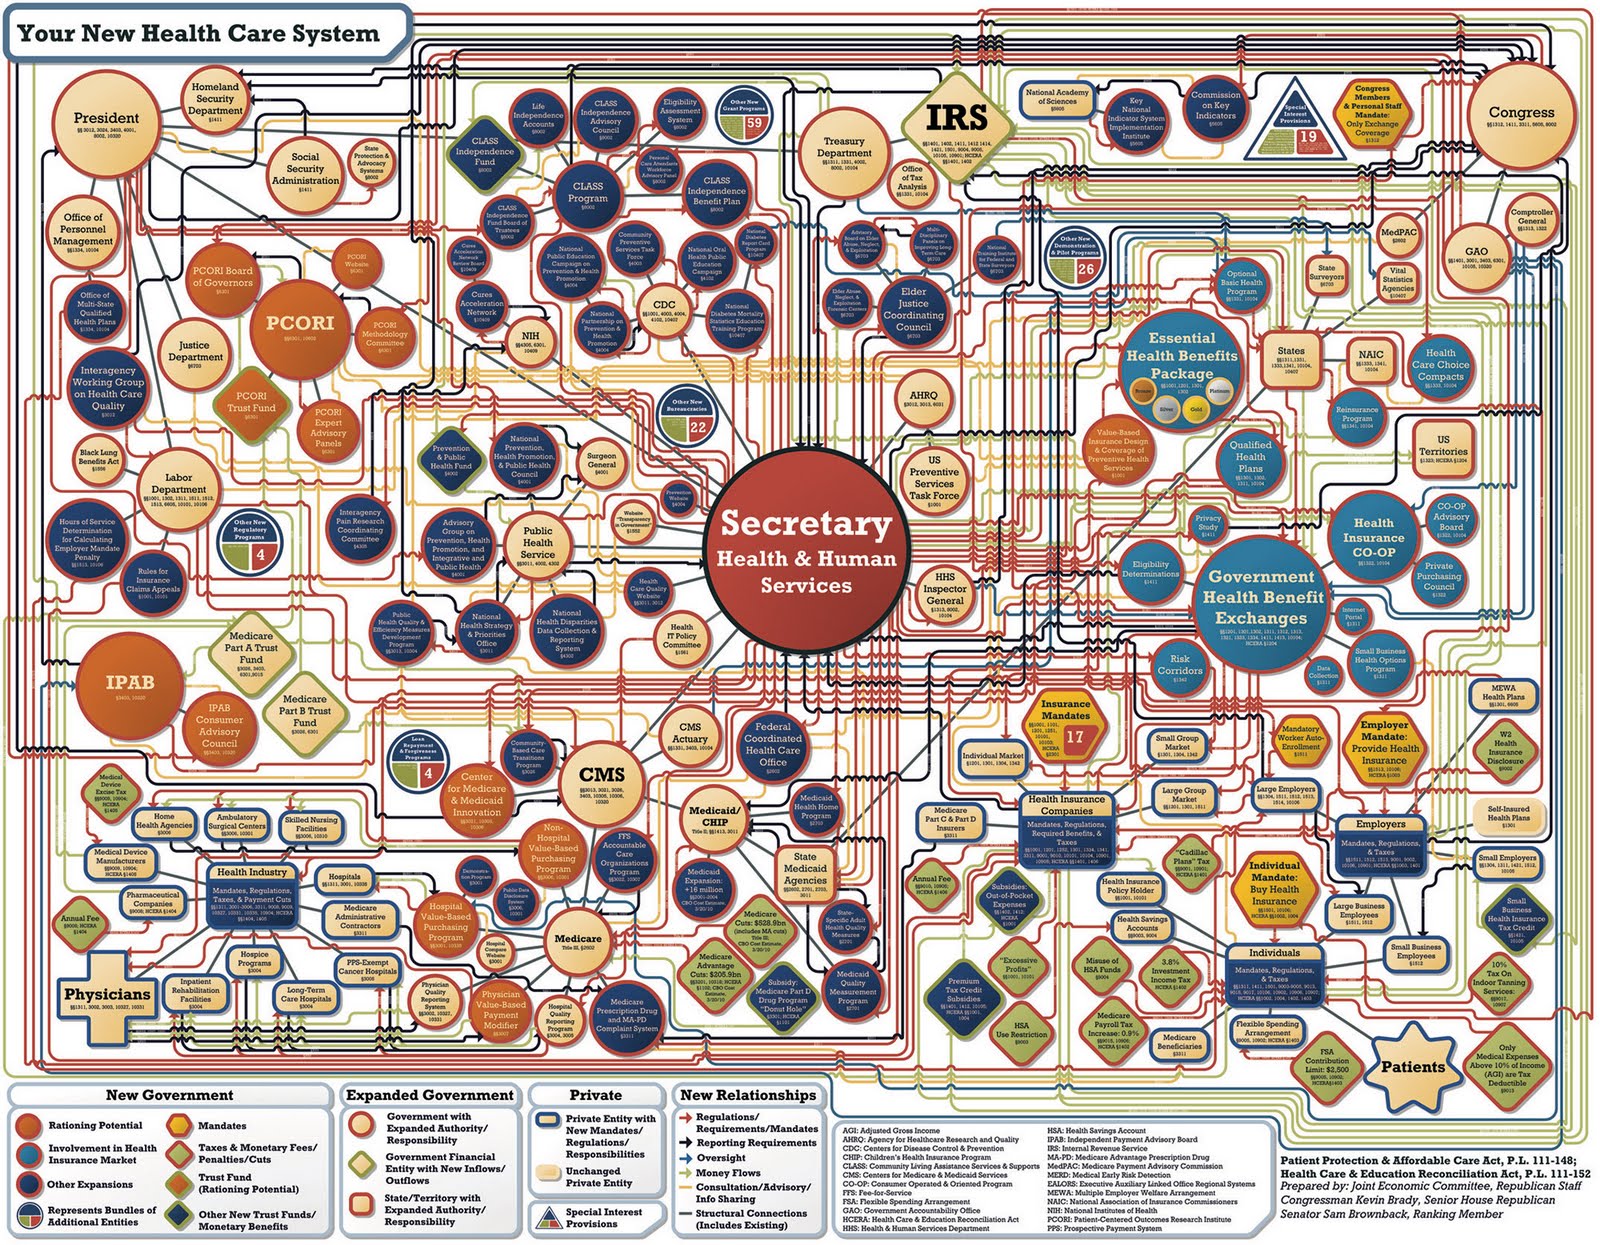 ObamaCare chart updated